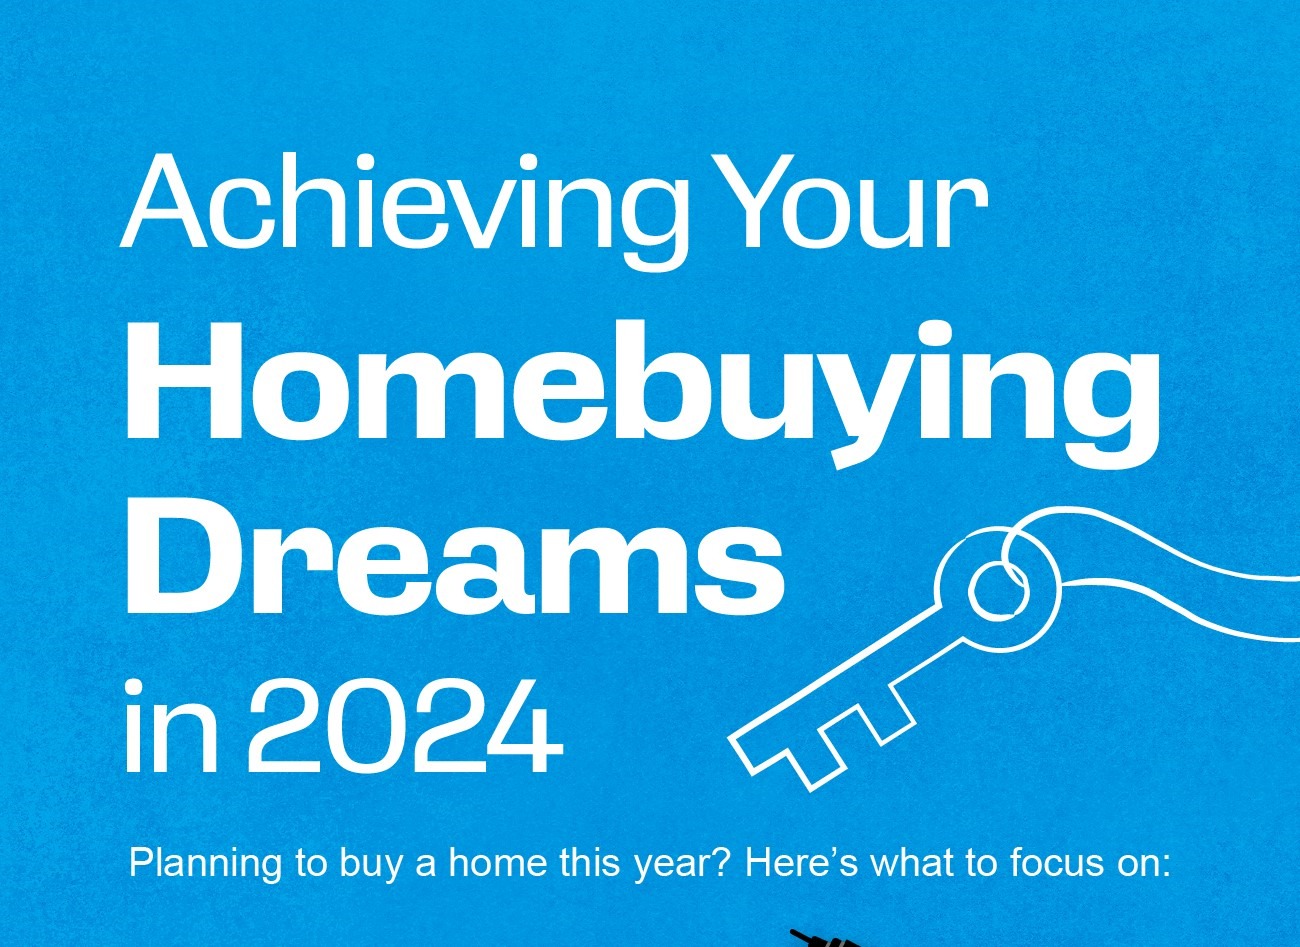 https://assets.site-static.com/blogphotos/3070/34970-achieving-your-homebuying-dreams-in-2024-mem.jpeg